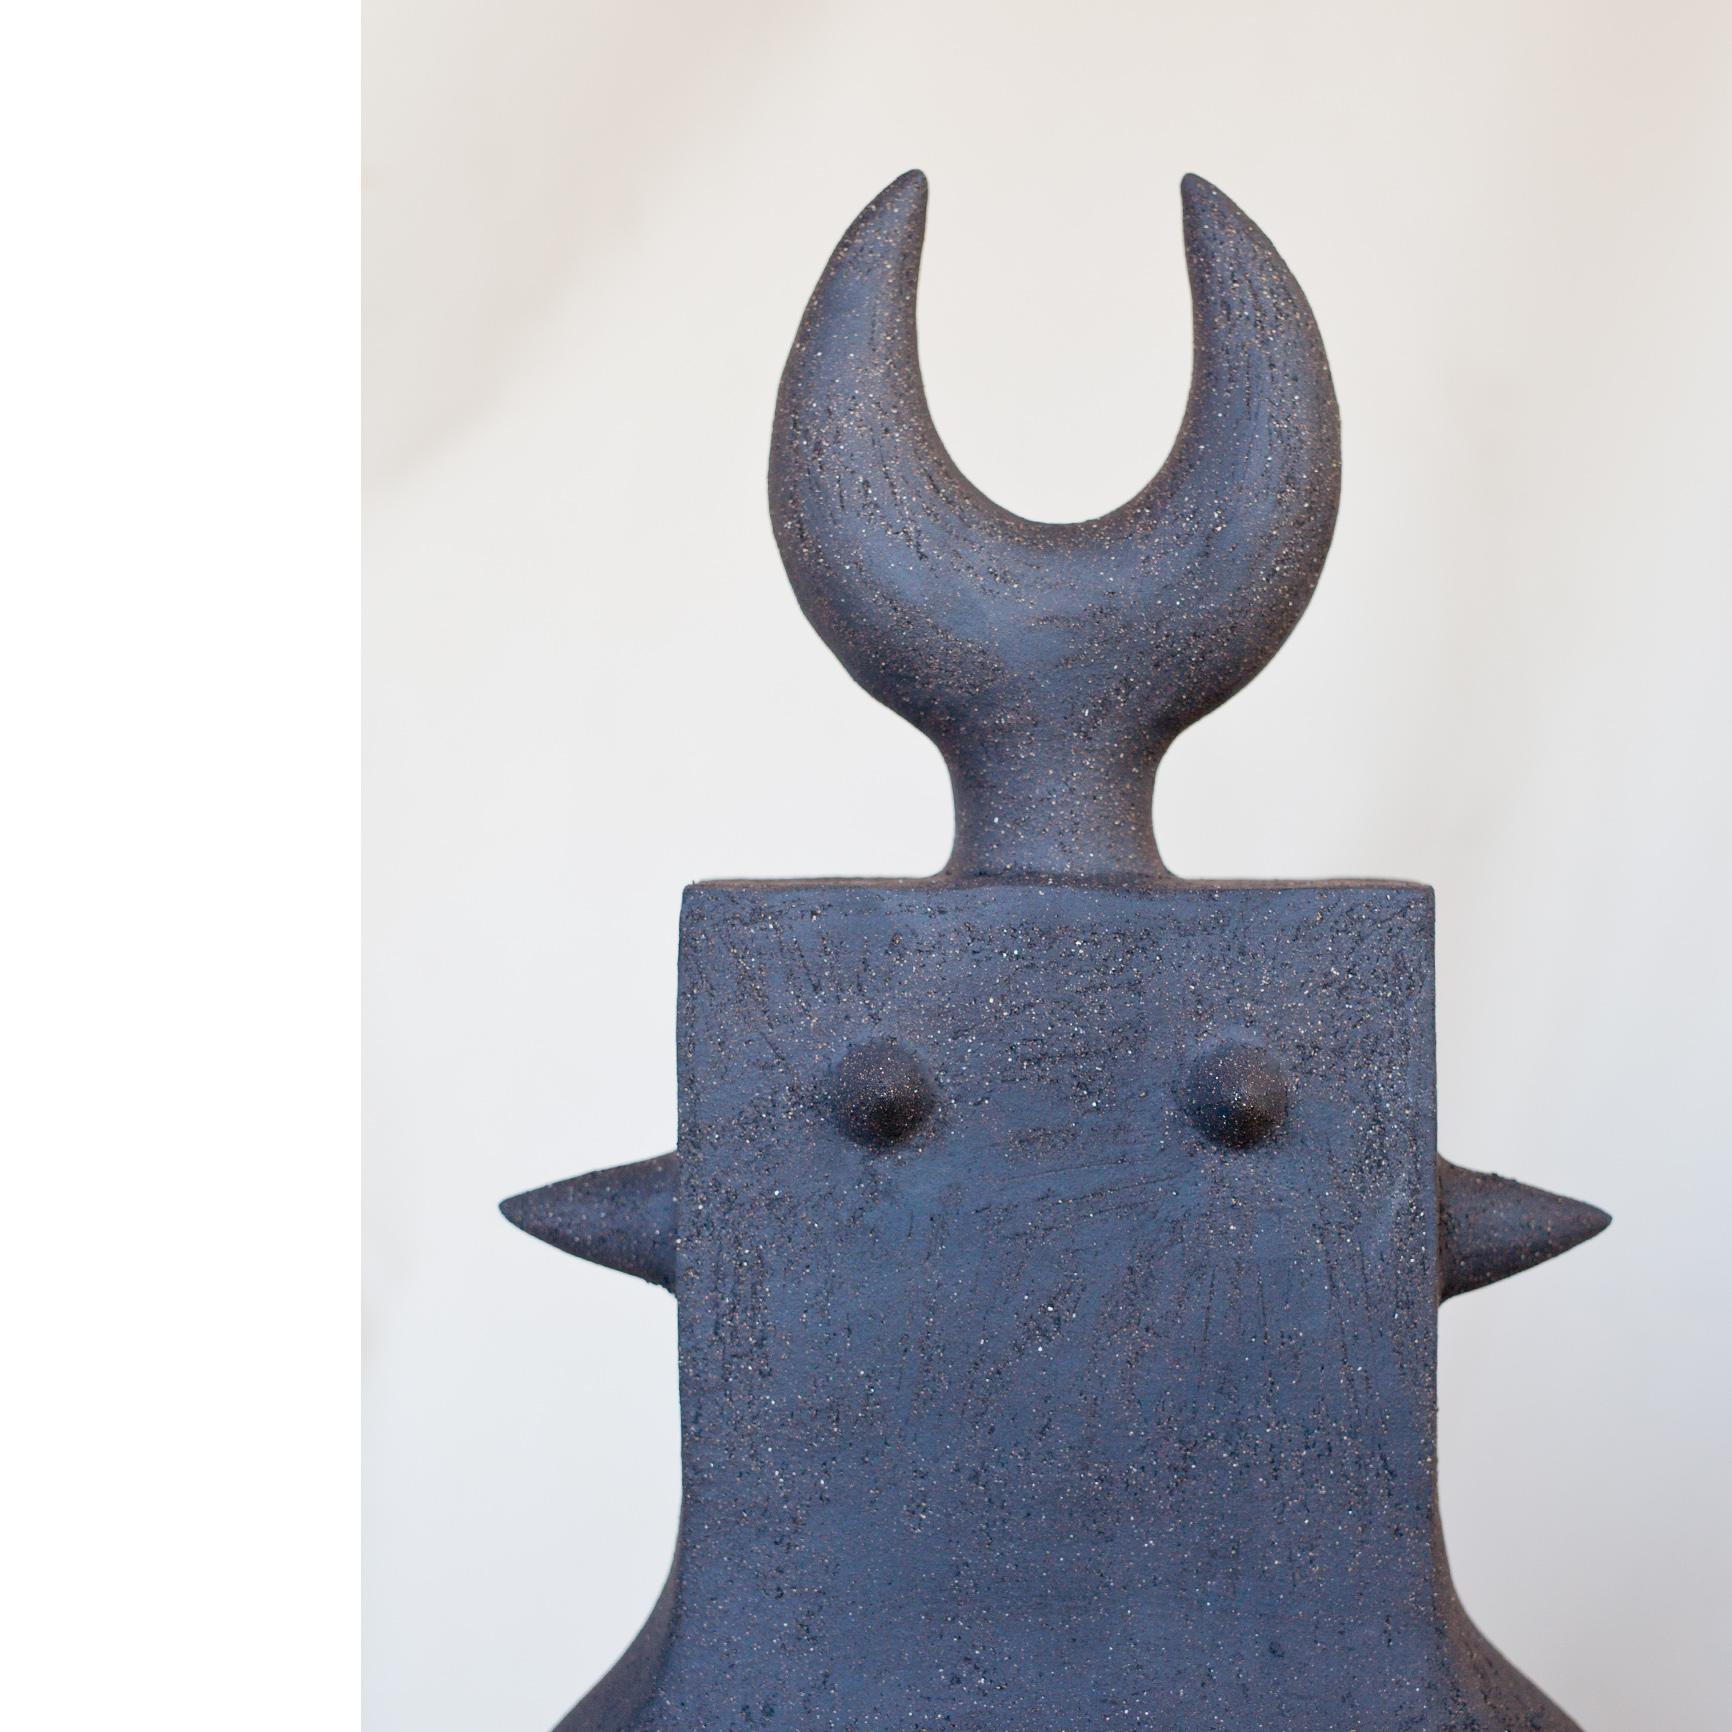 British Contemporary and Handcrafted, Haniwa Warrior 21 Decorative Piece by Noe Kuremoto For Sale